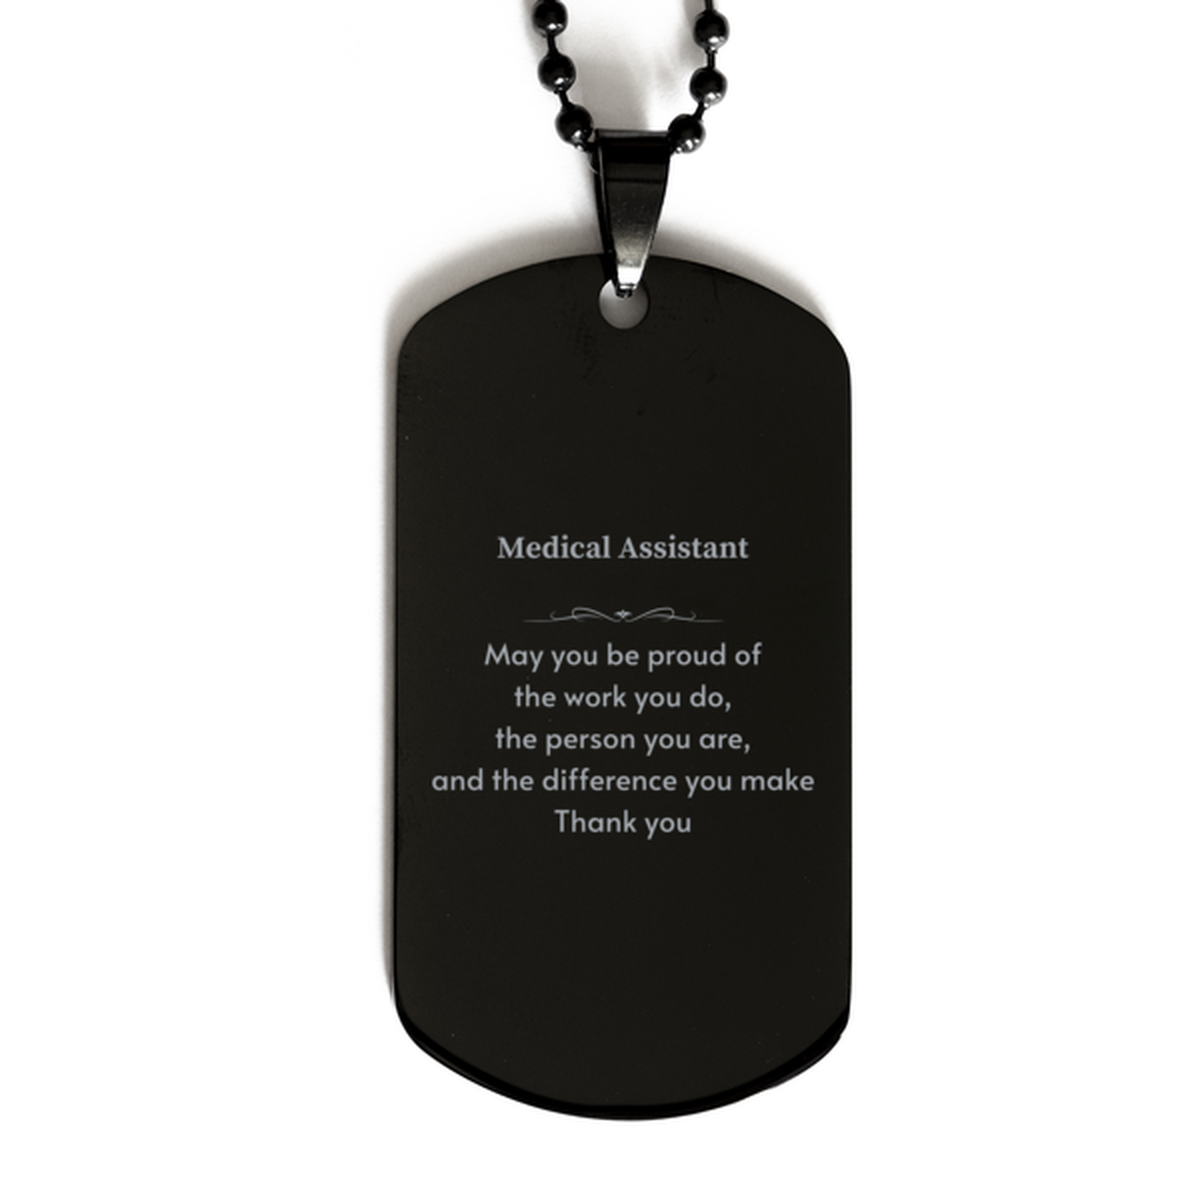 Heartwarming Black Dog Tag Retirement Coworkers Gifts for Medical Assistant, Medical Assistant May You be proud of the work you do, the person you are Gifts for Boss Men Women Friends